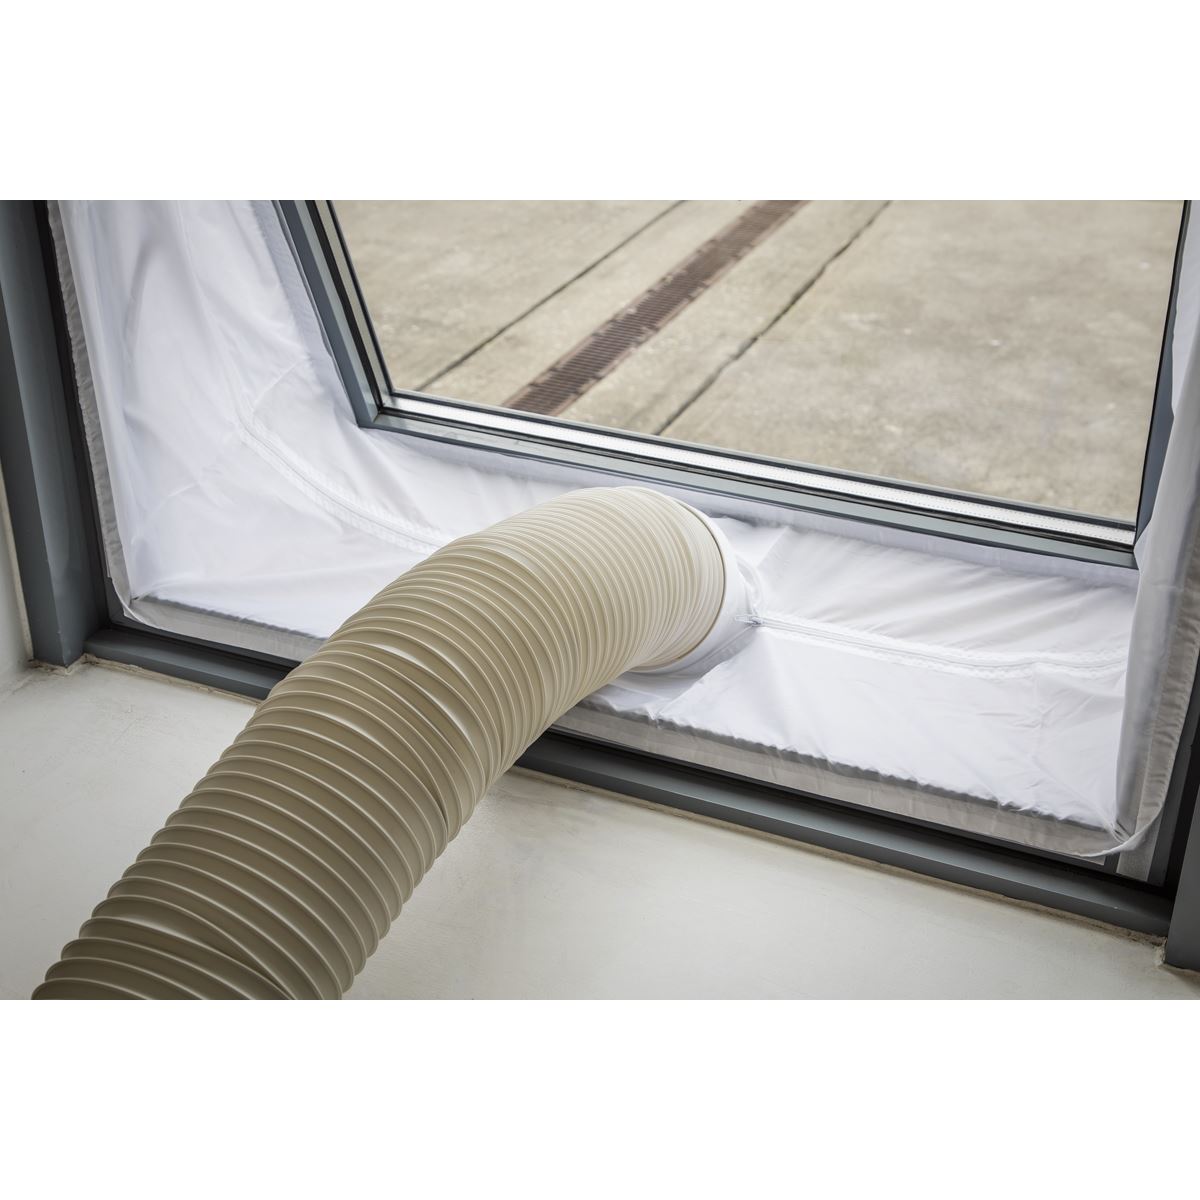 Sealey Window Sealing Kit for Air Conditioner Ducting